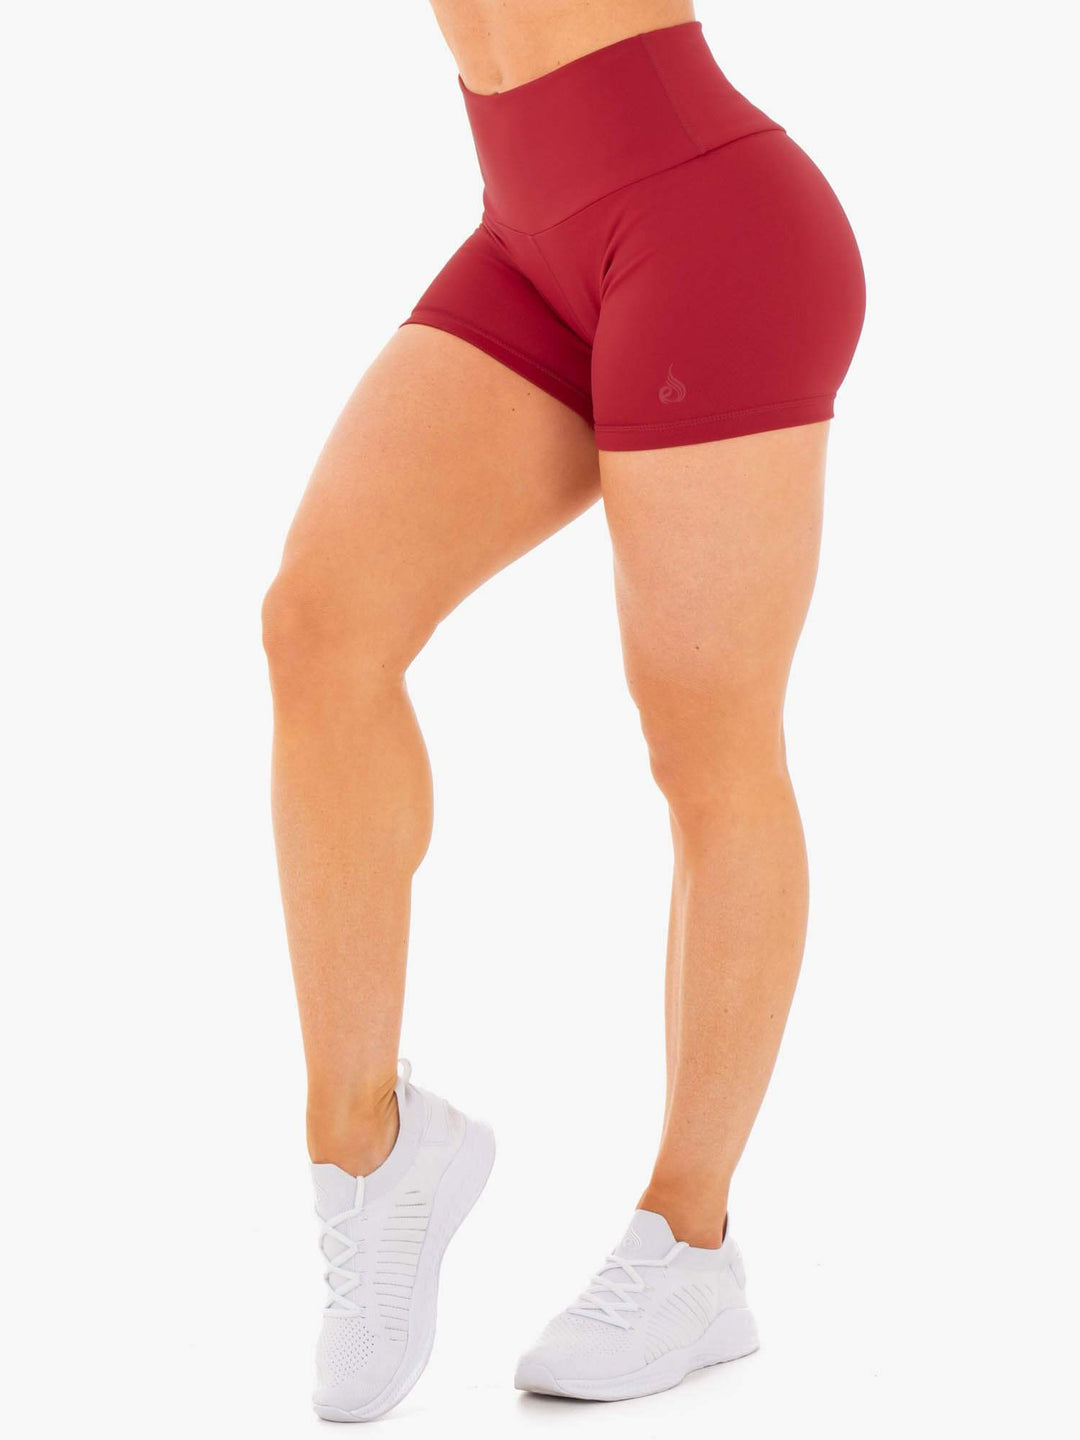 Motion High Waisted Shorts - Red Clothing Ryderwear 